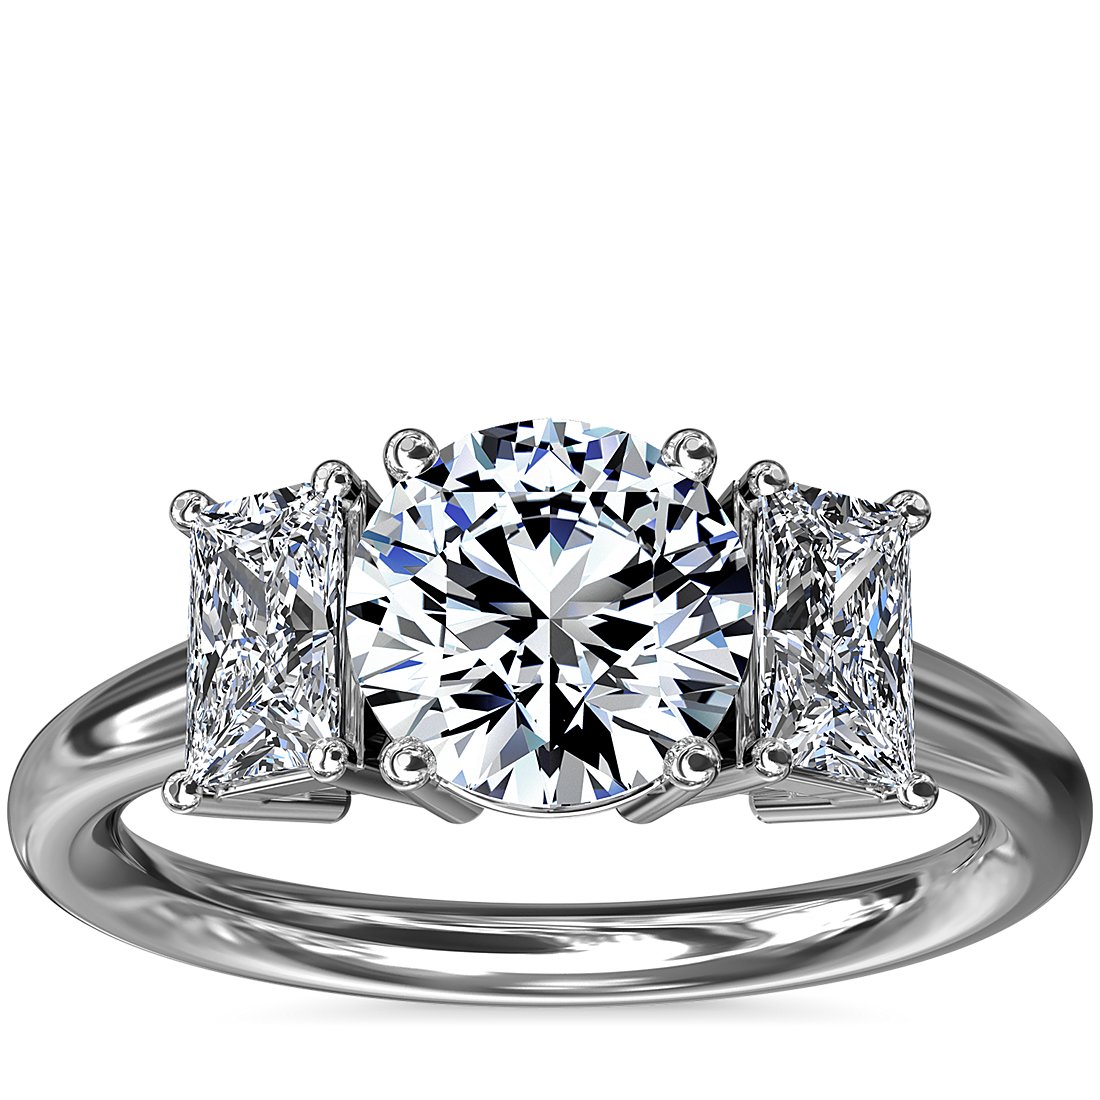 Three-stone diamond engagement ring with a round diamond in the middle 